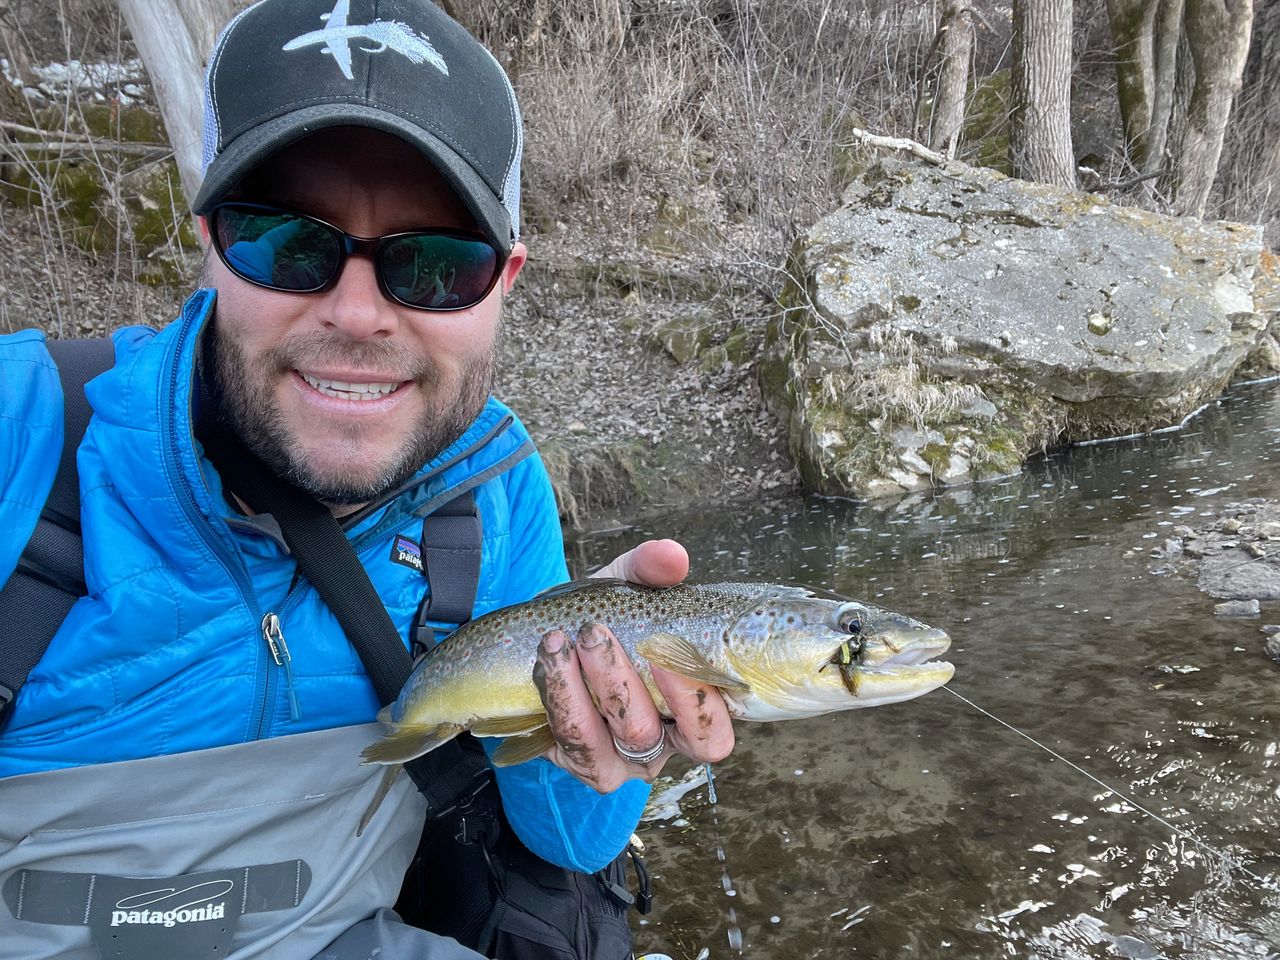 Streamer Fly Fishing for Trout in The Driftless Region March 2021